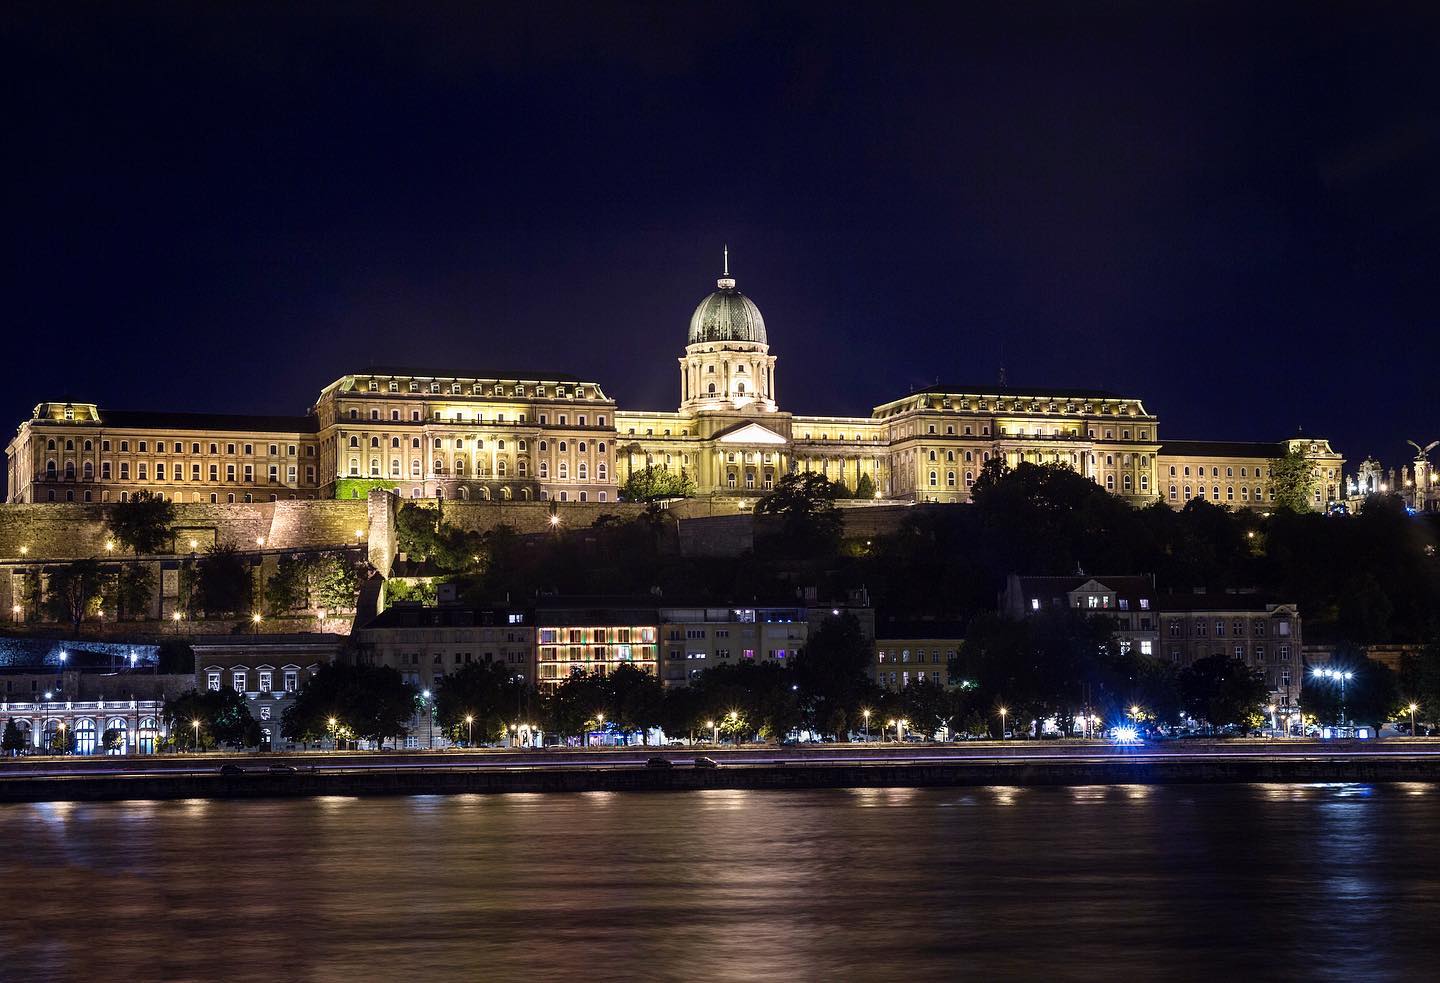 Buda Castle is the historical castle and palace complex of the Hungarian kings in Budapest. It was first completed in 1265, but the massive Baroque palace today occupying most of the site was built between 1749 and 1769. The castle now houses the Hungarian National Gallery and The Budapest History Museum.
.
.
#budapest #hungary #royal #royalpalace #burgpalast #europe #buda #pest #night #longexposure #lighttrail #lighttrails #bridge #pestbynight #travel #wonderful_places #traveler #travelblogger #travelling #travelphotography #travelgram #budapesthungary #budapestgram #donau #danube #danuberiver